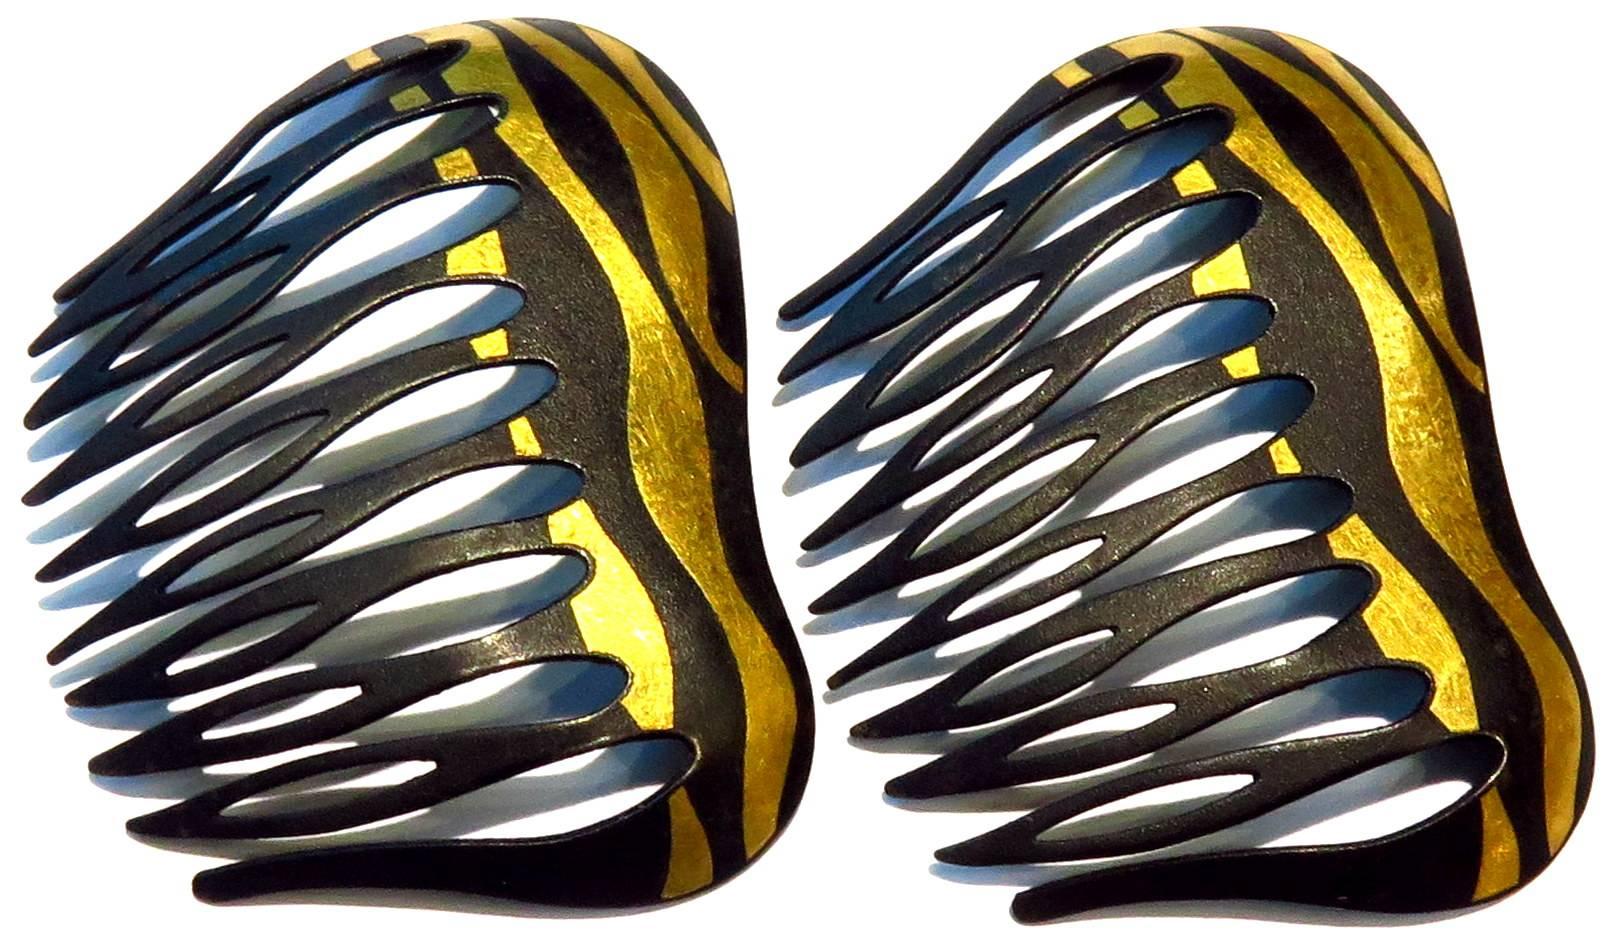 This wonderful pair of hair combs look so chic on that you'll want to wear them everyday! 
They measure 2 5/16 inches across by 1 3/4 inch high
They weigh 20.5 grams
They are signed T & Co on the back of each one. Refer image 6 and 3
t
